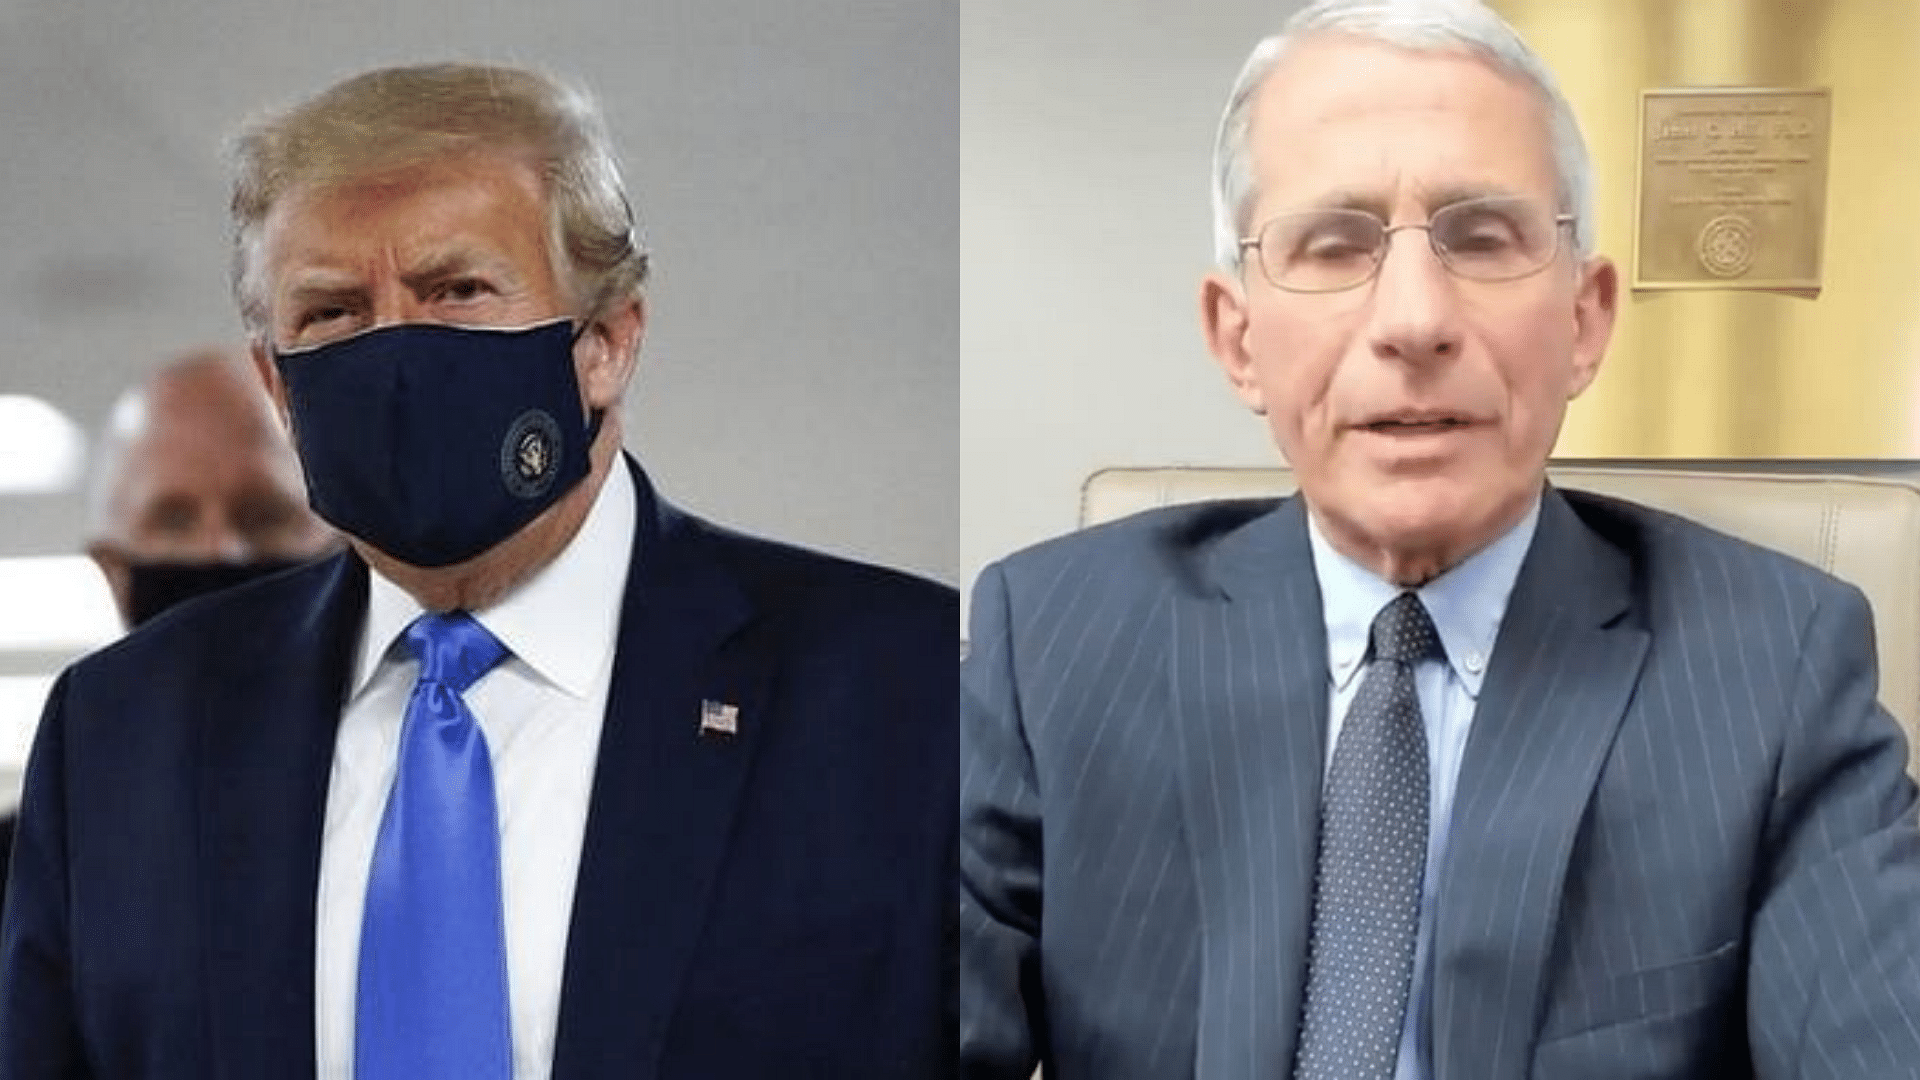 President Trump (L) and Dr. Anthony Fauci